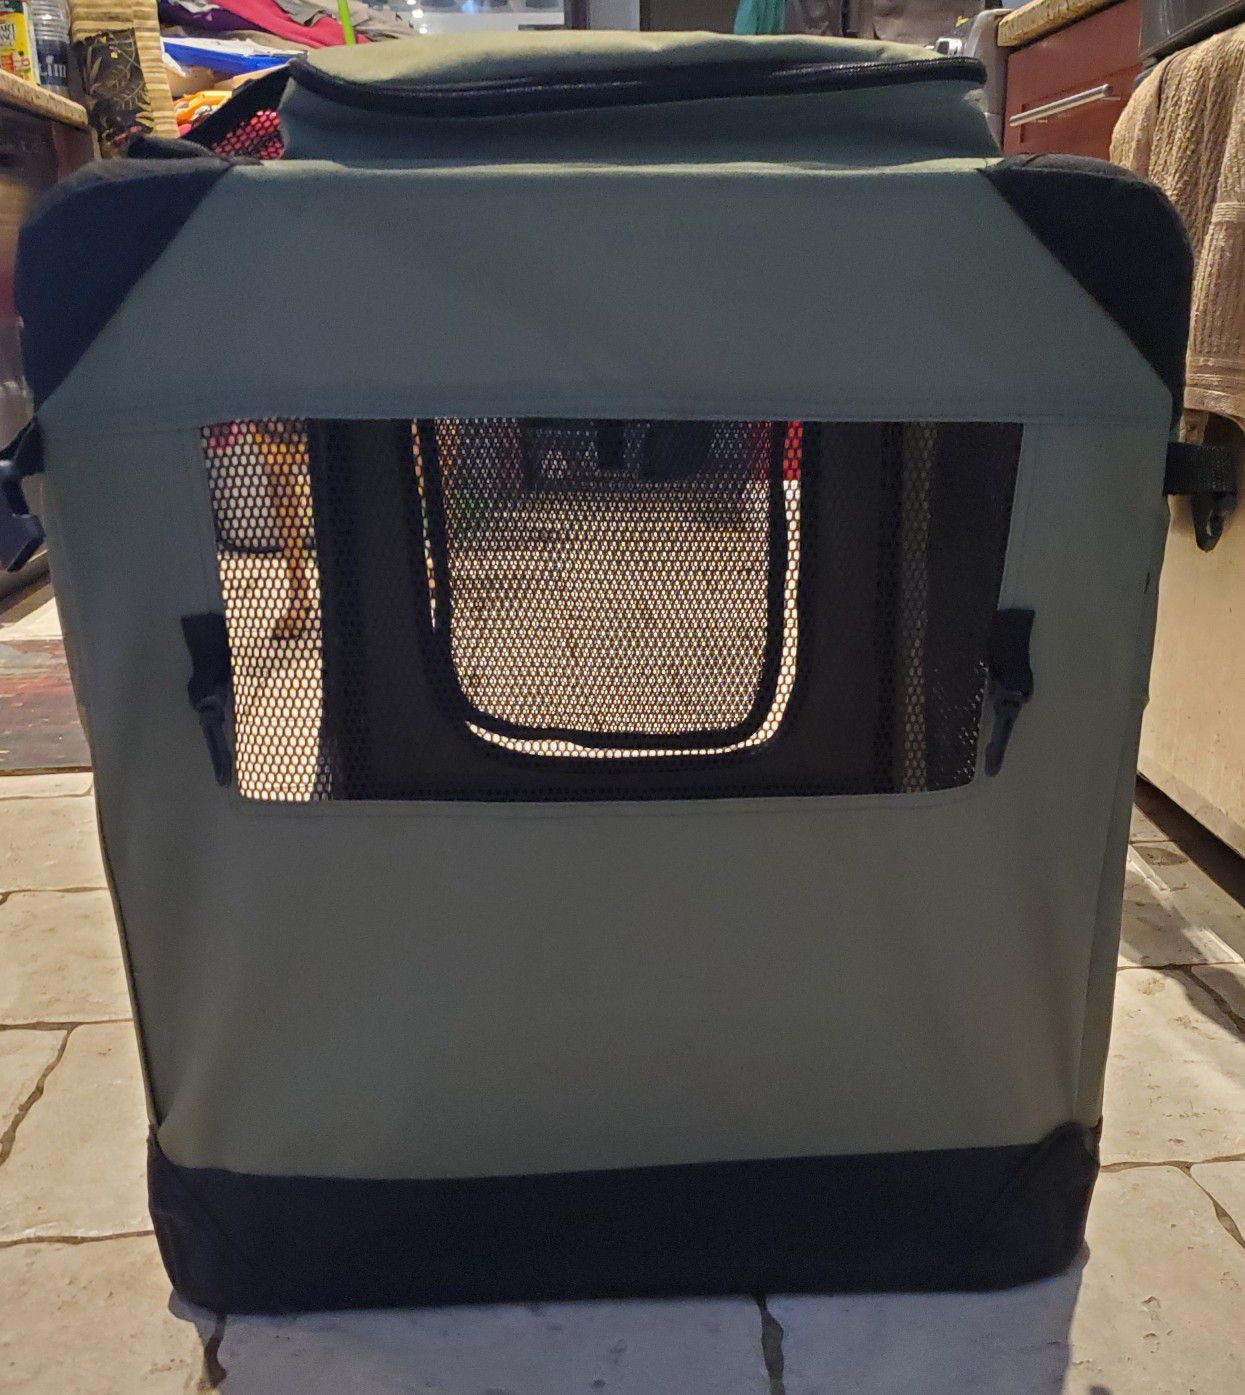 Dog crate foldable